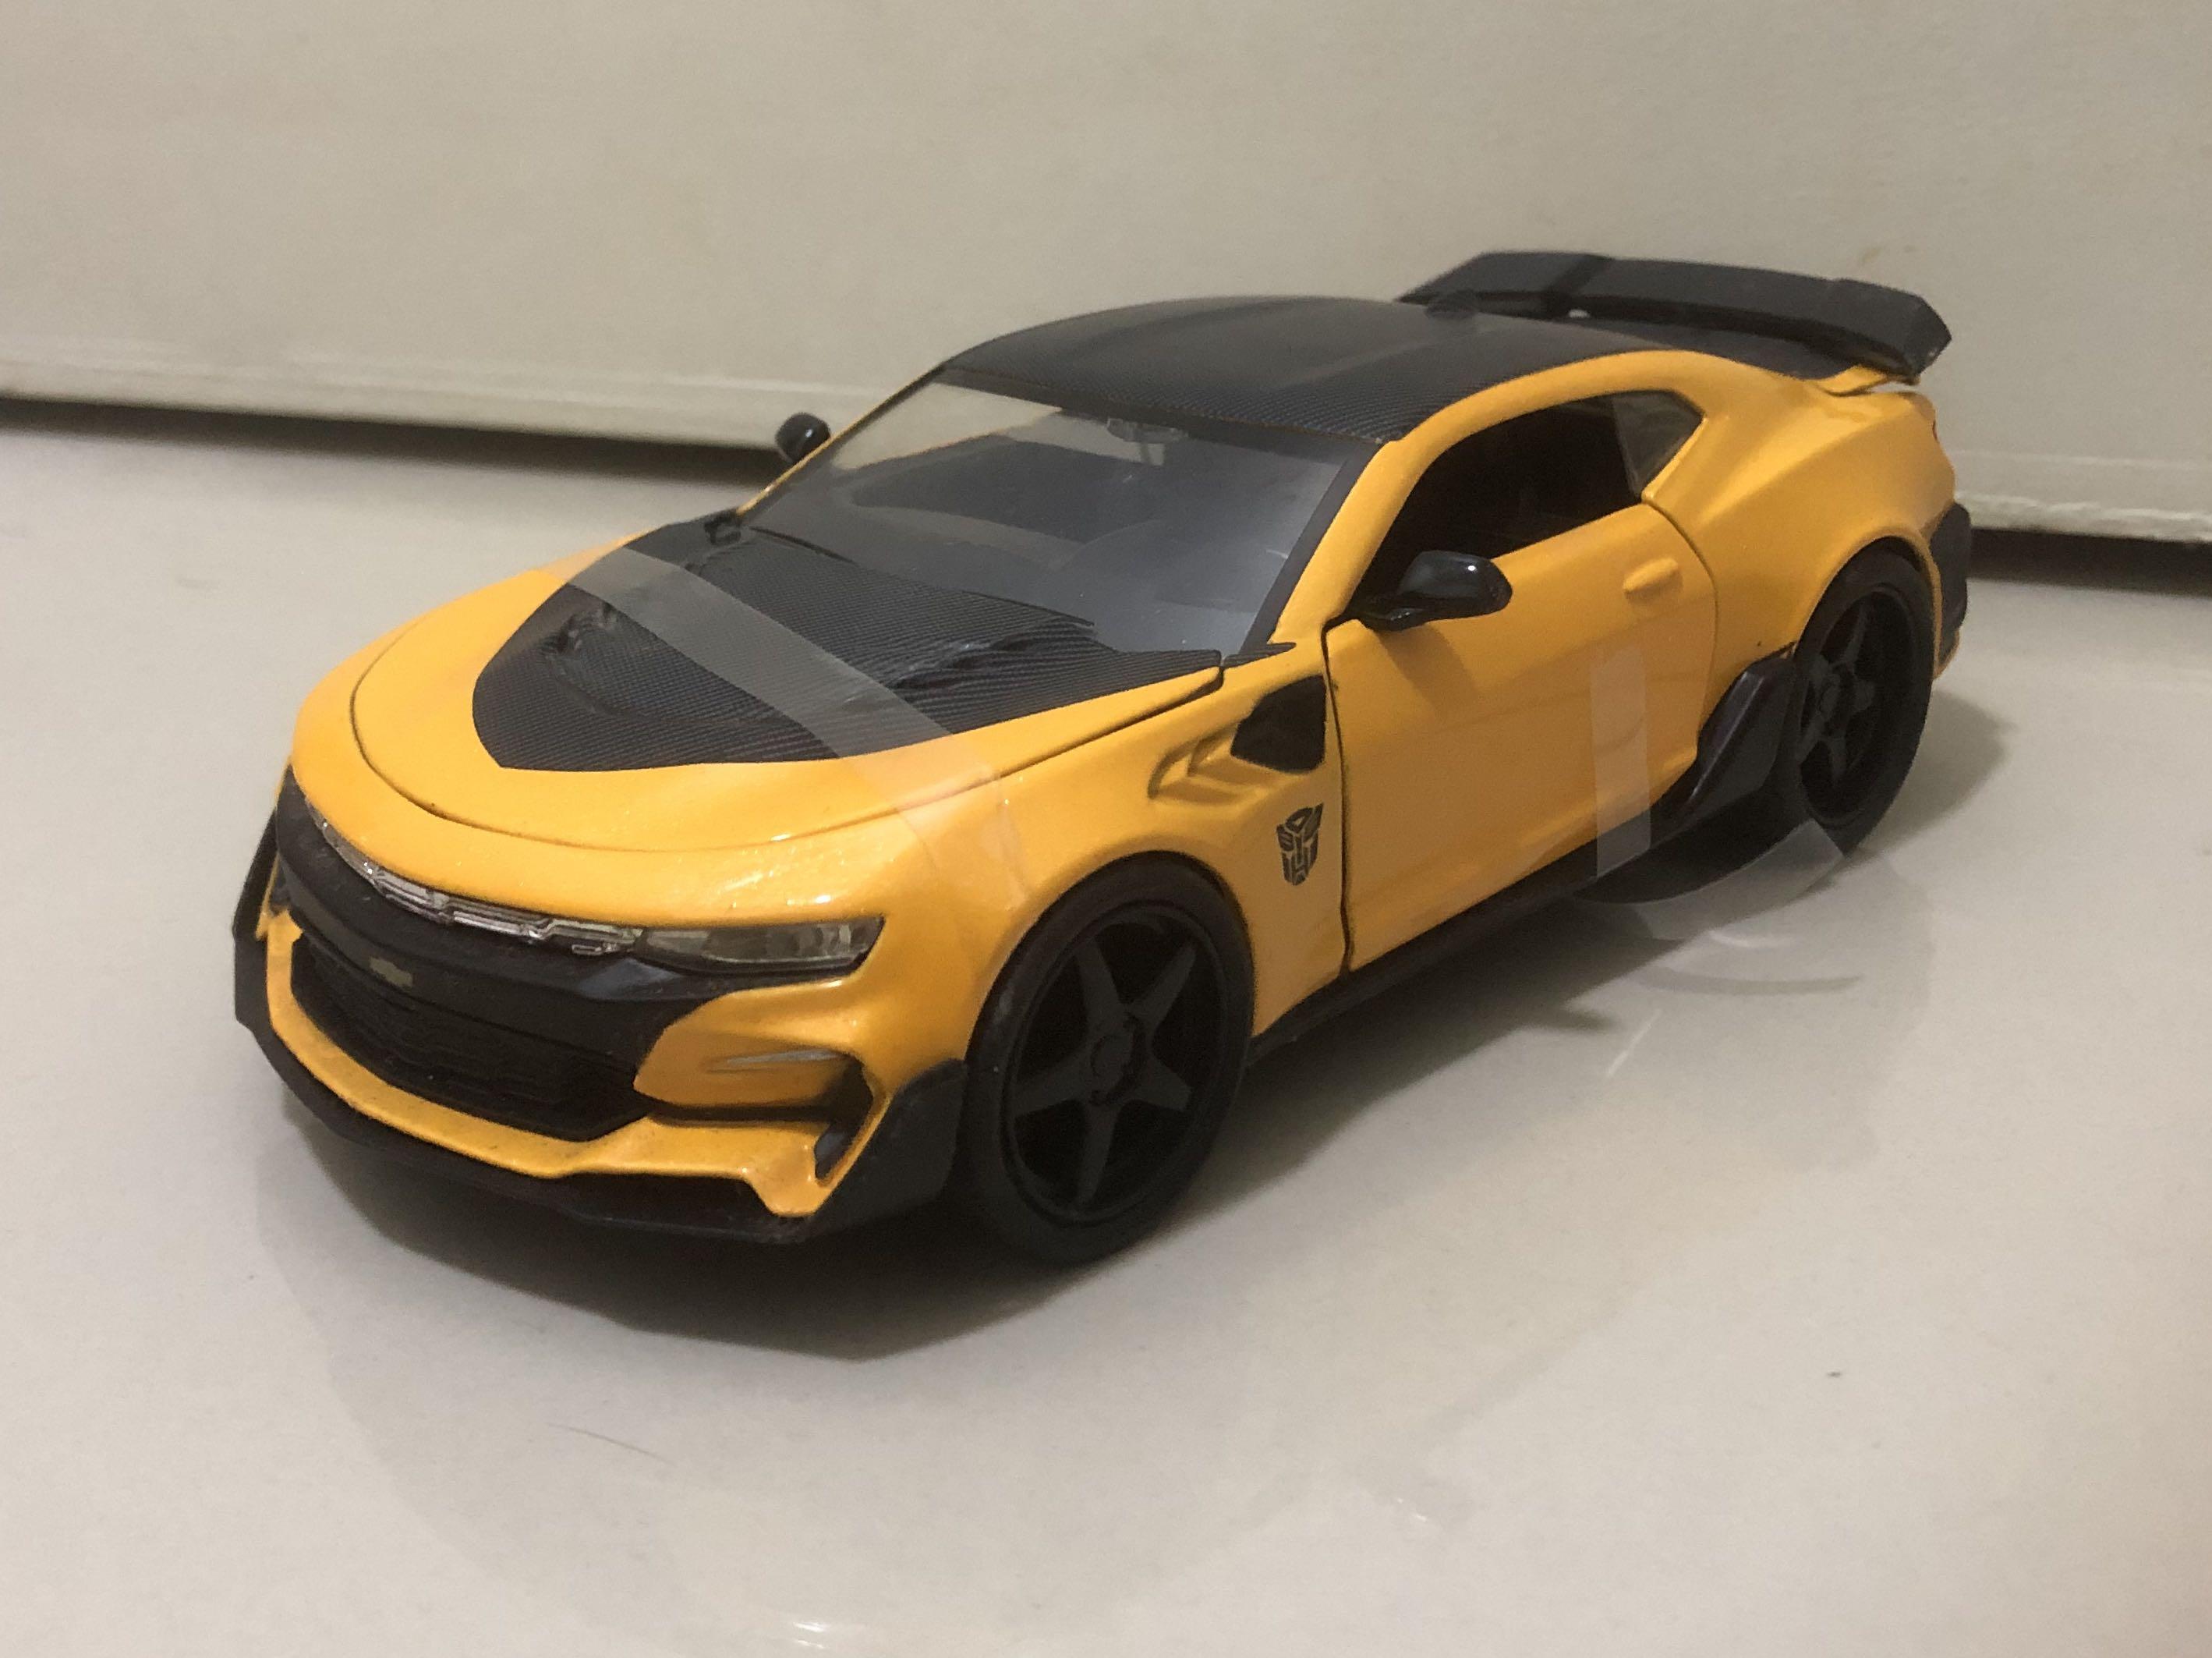 JADA TOYS TRANSFORMERS 1/24 1:24 BUMBLEBEE YELLOW CHEVY CHEVROLET CAMARO  THE LAST KNIGHT, Hobbies & Toys, Toys & Games on Carousell